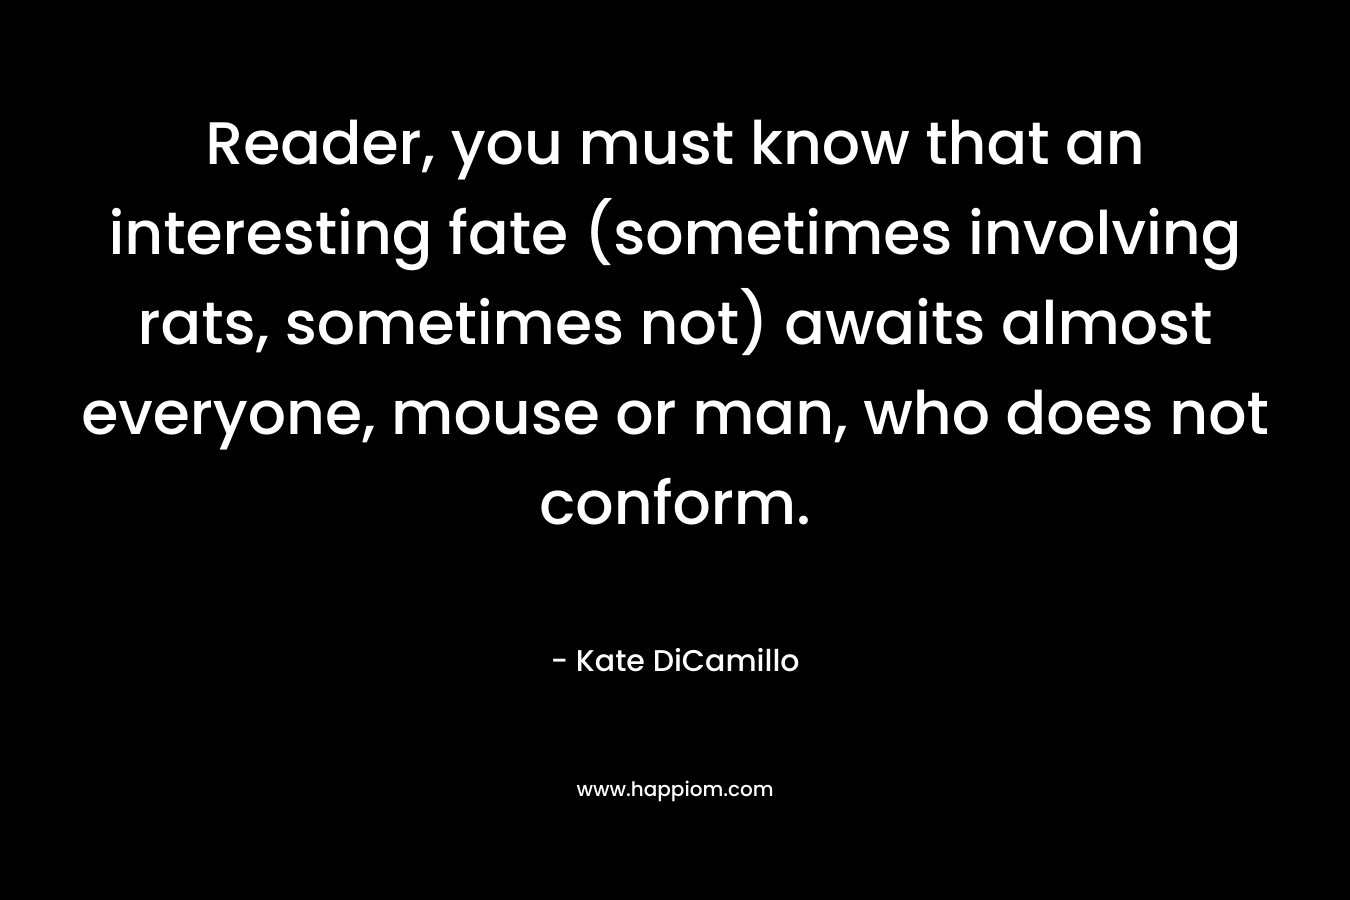 Reader, you must know that an interesting fate (sometimes involving rats, sometimes not) awaits almost everyone, mouse or man, who does not conform. – Kate DiCamillo